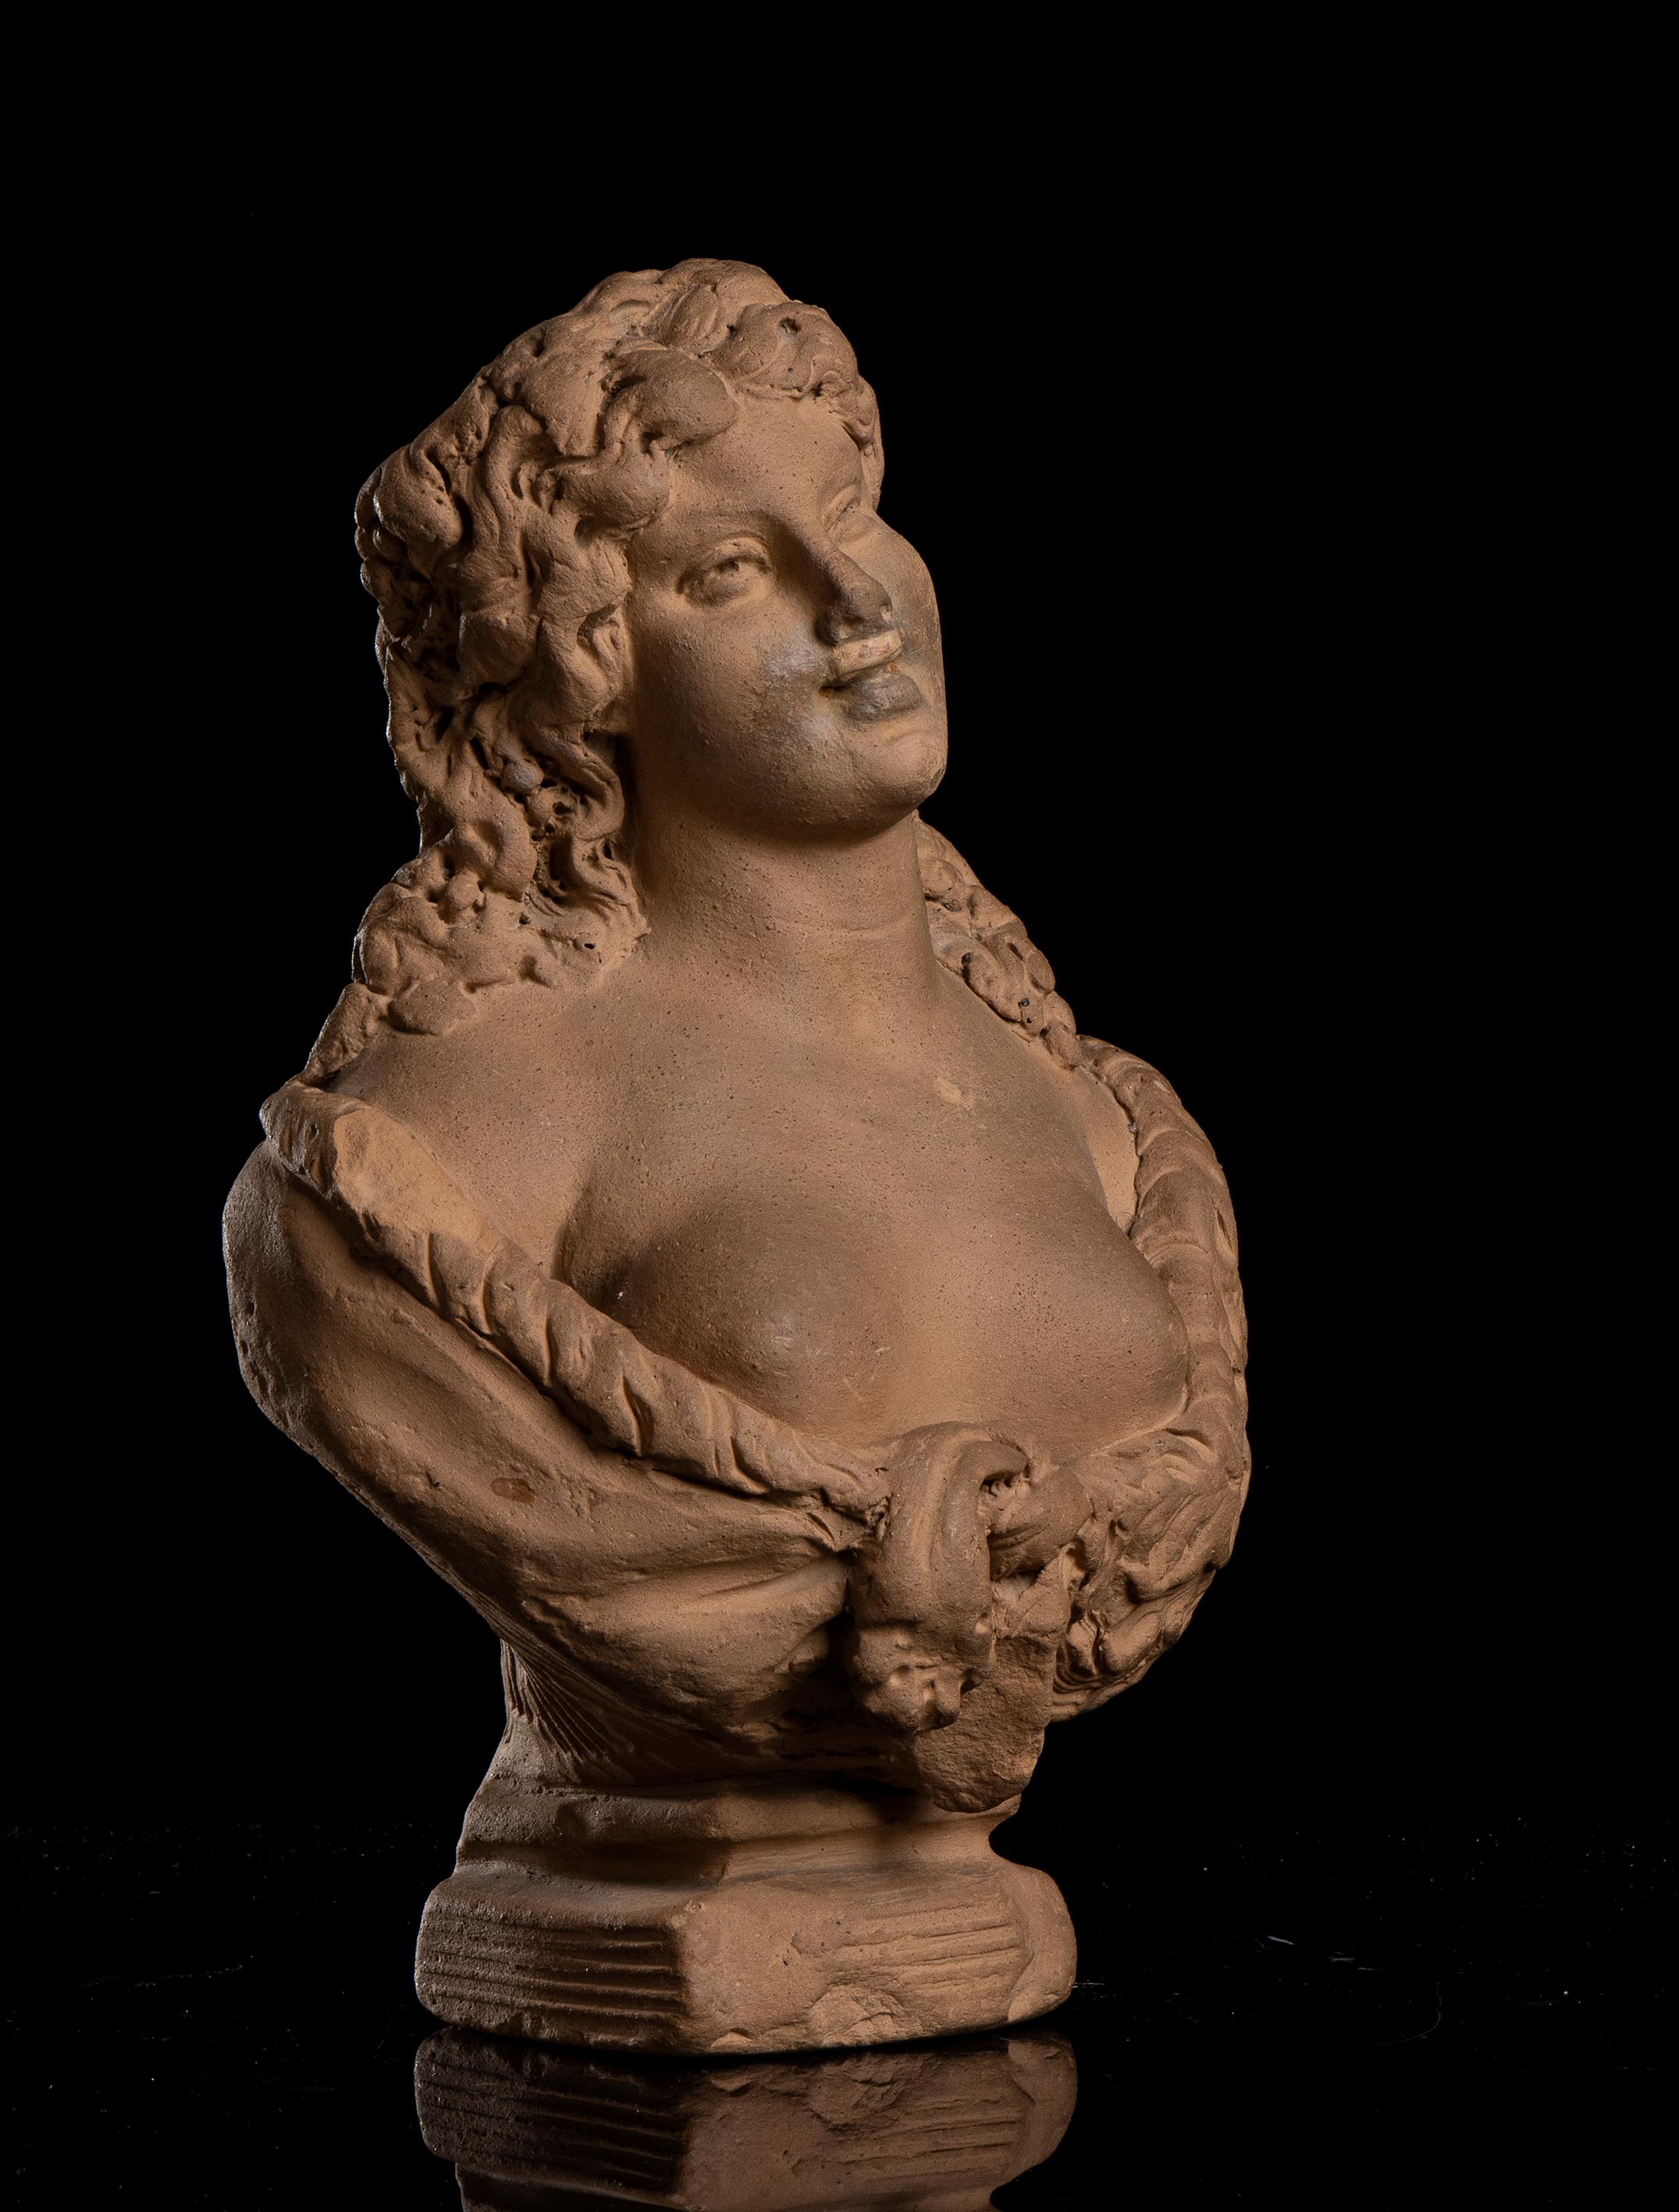 Nymph And Satyr Pair Of Sculptures Busts  By Lanzirotti Signed Terracotta 19th  For Sale 17